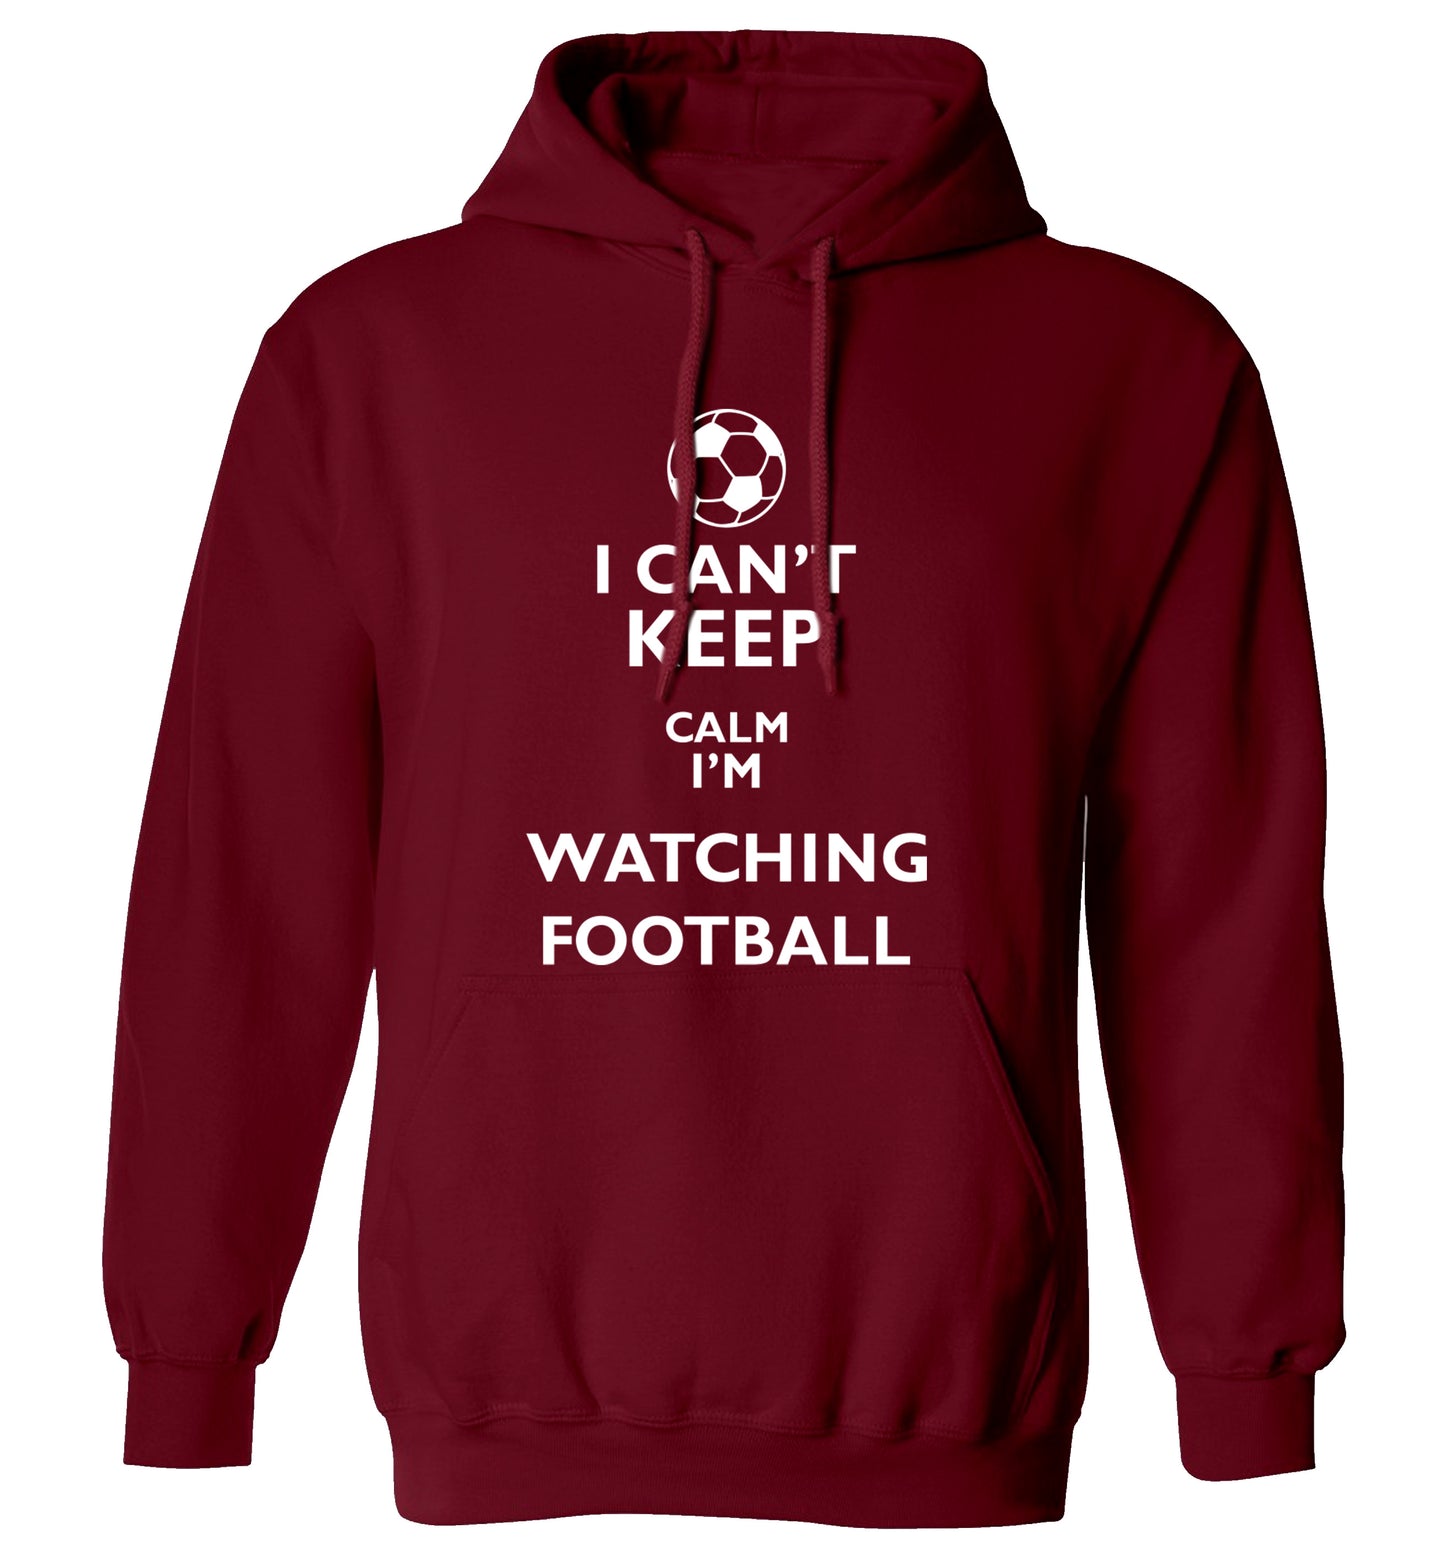 I can't keep calm I'm watching the football adults unisexmaroon hoodie 2XL